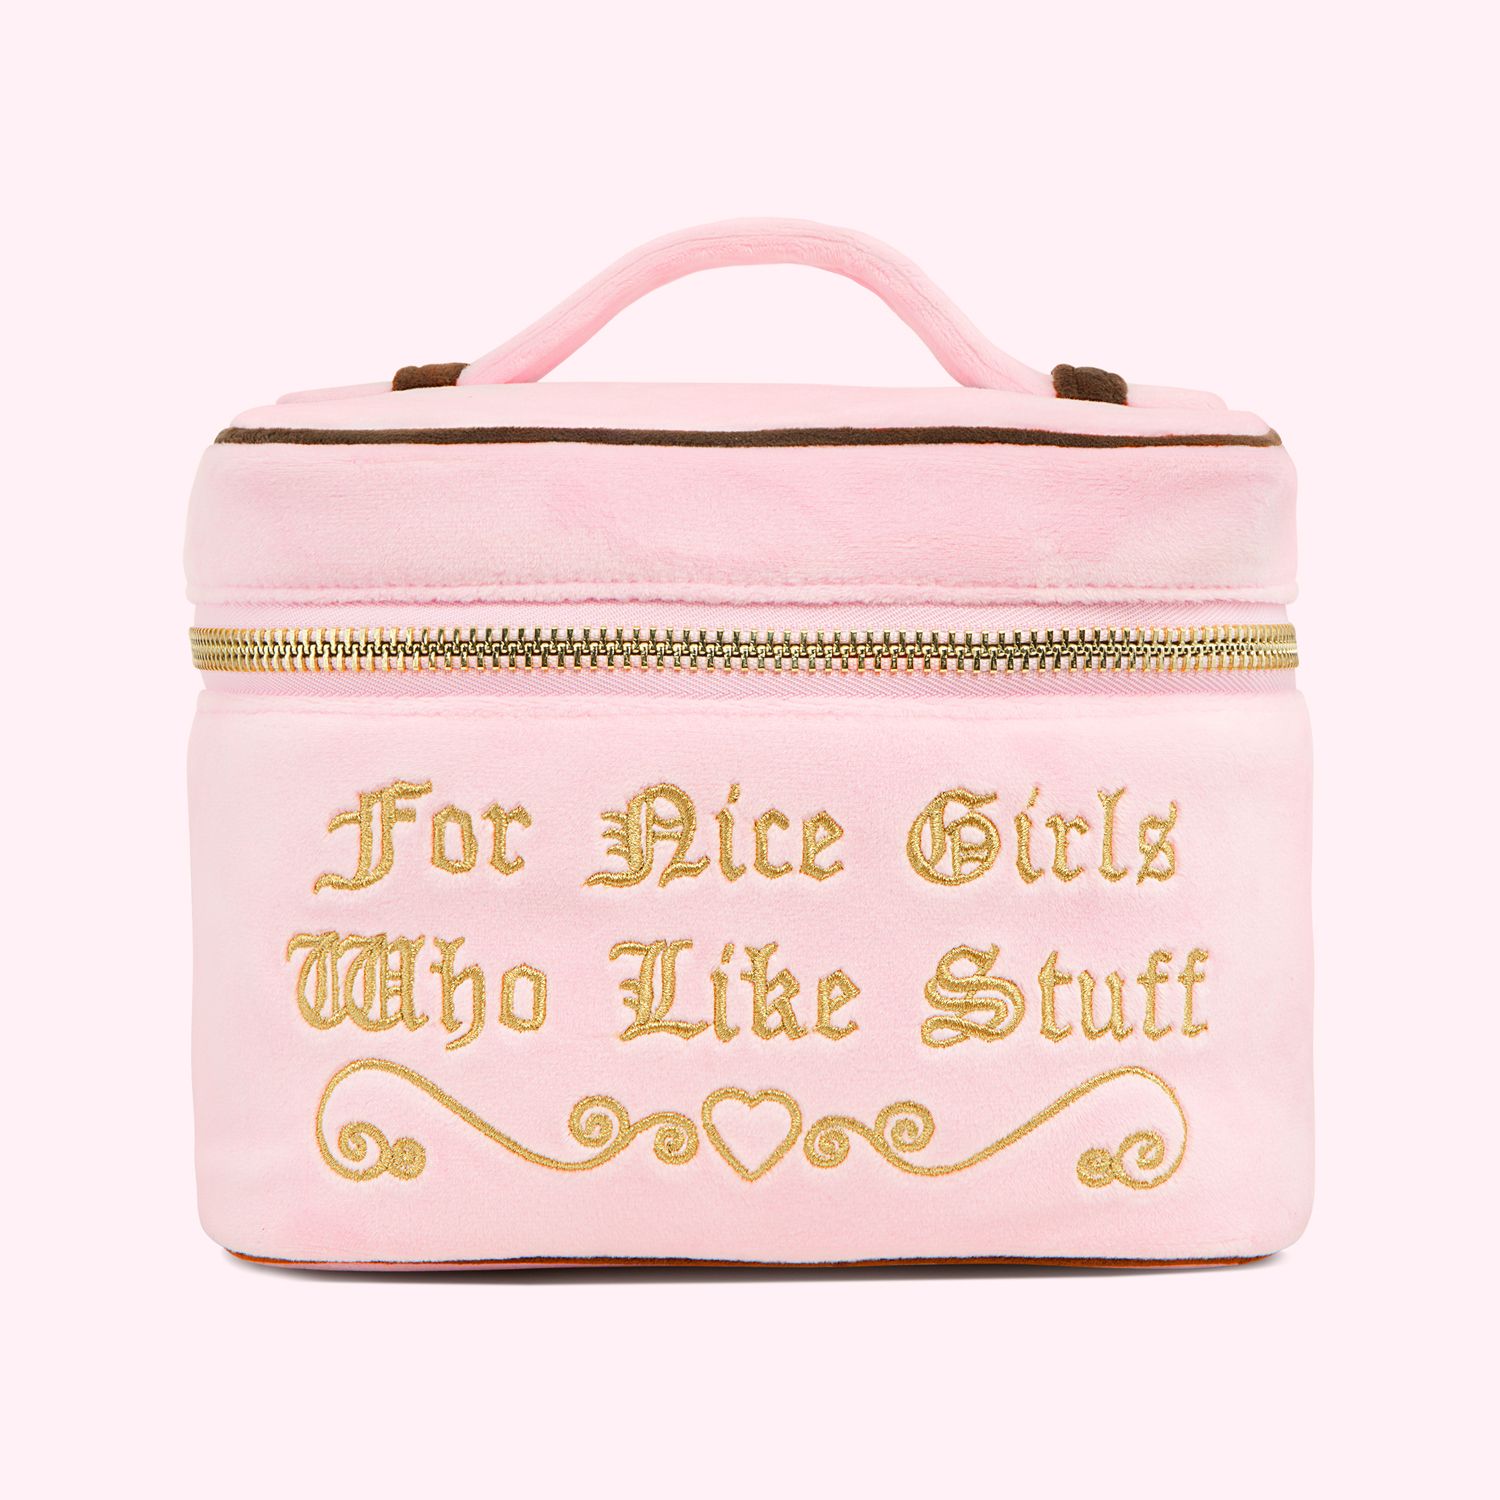 Juicy Couture Embroidered Vanity Case | Travel Accessories - Stoney Clover Lane | Stoney Clover Lane